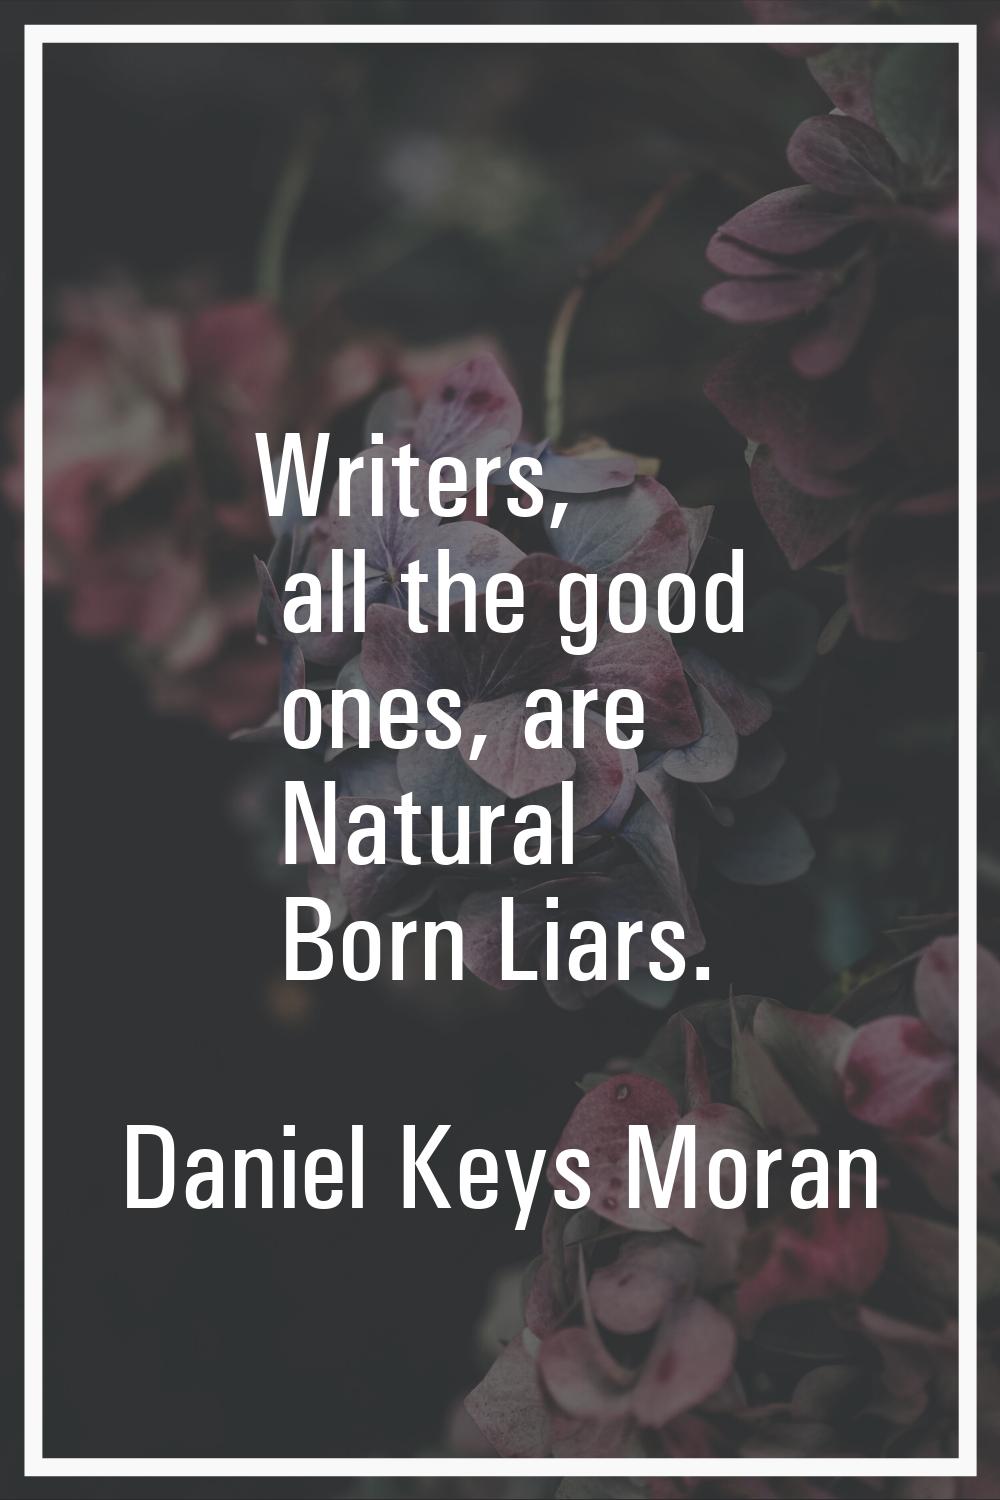 Writers, all the good ones, are Natural Born Liars.